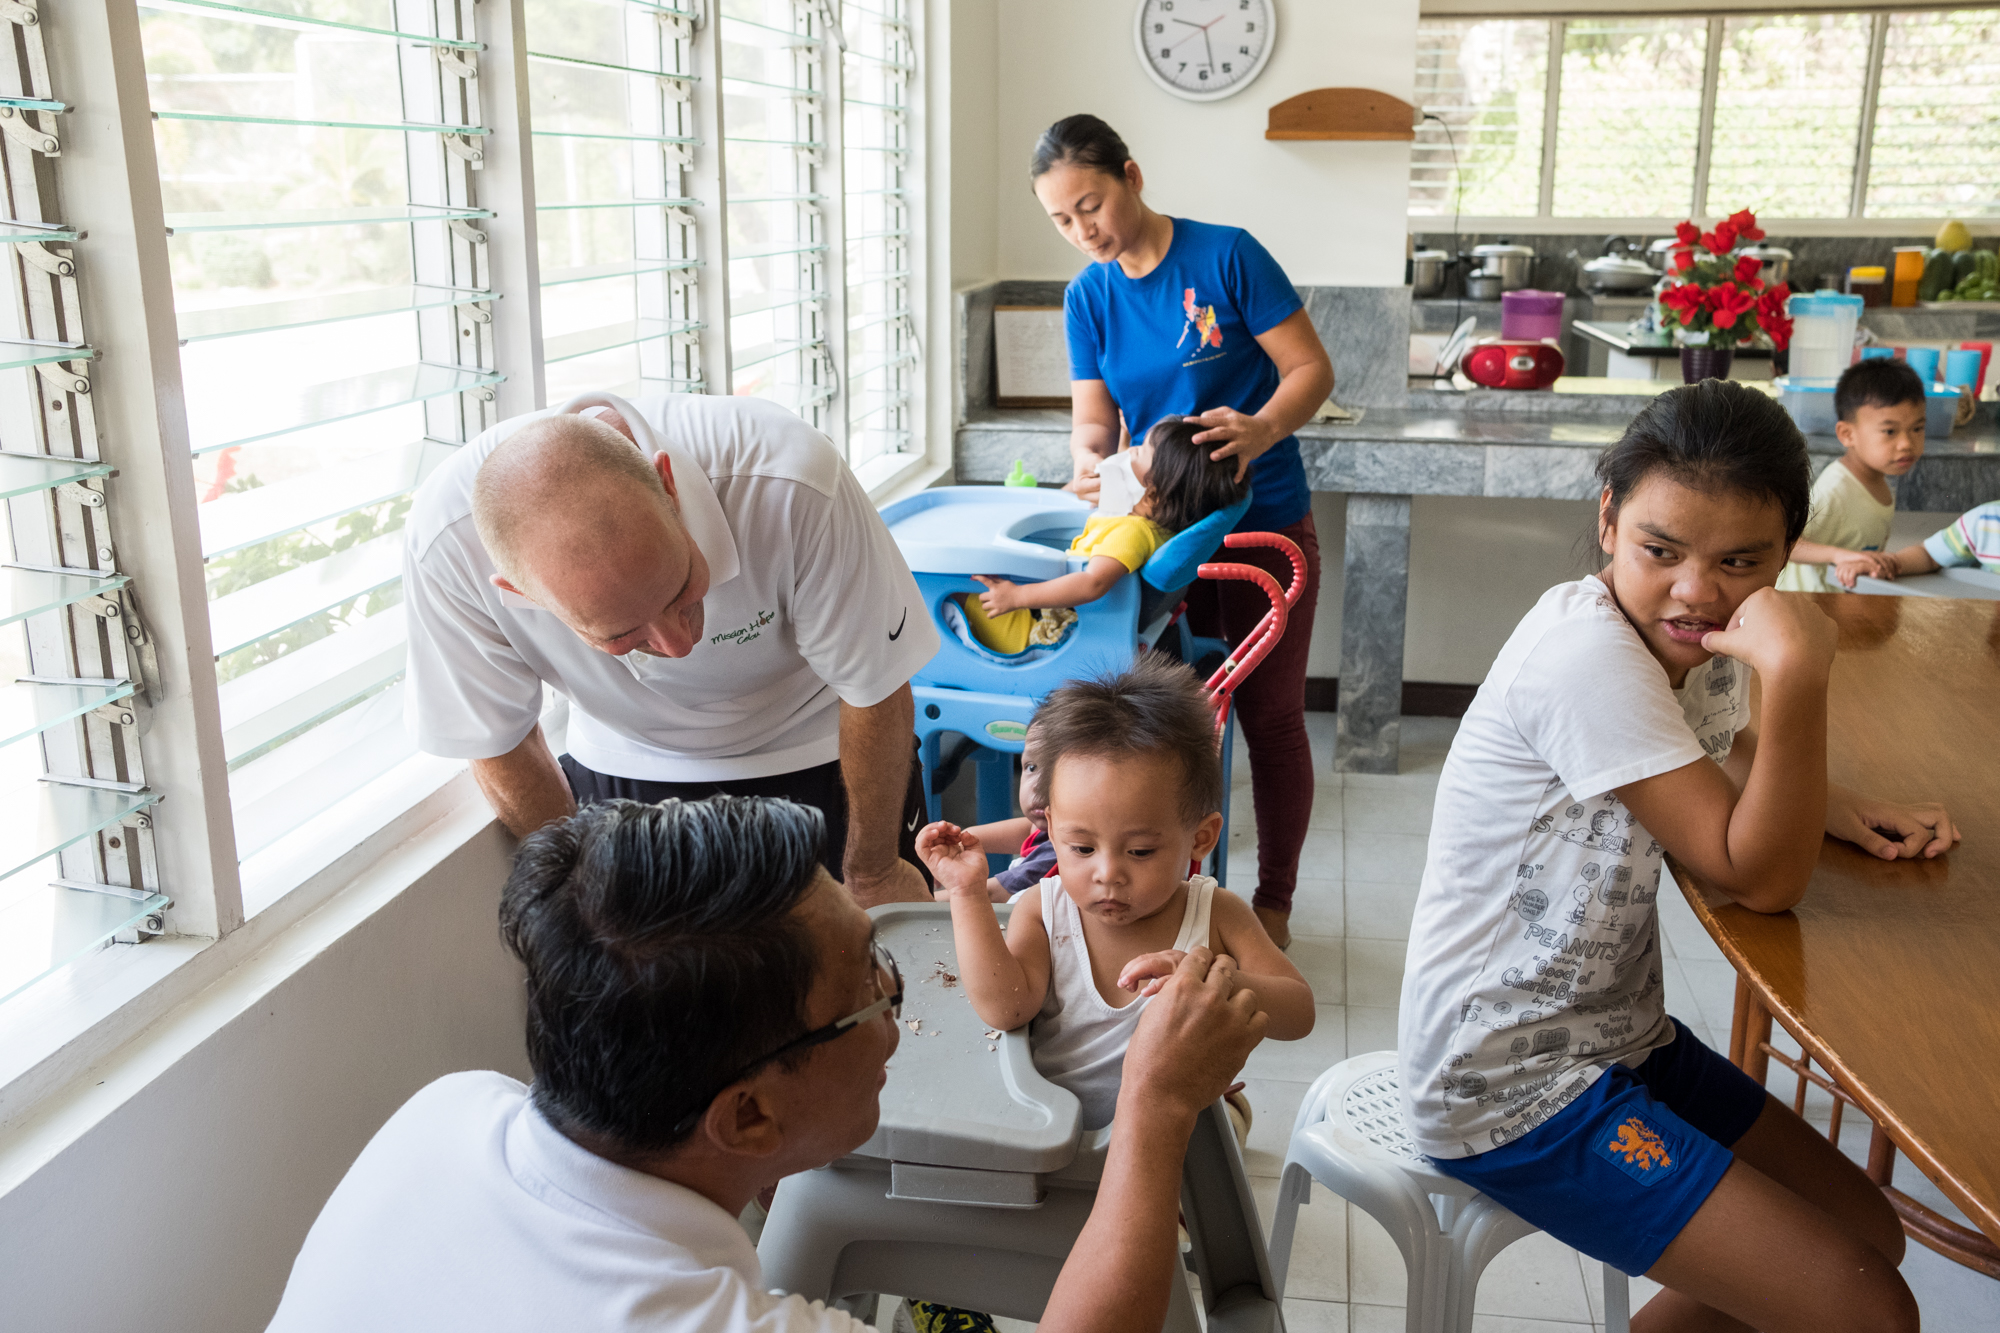  Frank Becker interacts with children at the Children’s Shelter of Cebu in Cebu City, Philippines. During Frank’s sabbatical he works with many different organizations that help children. 